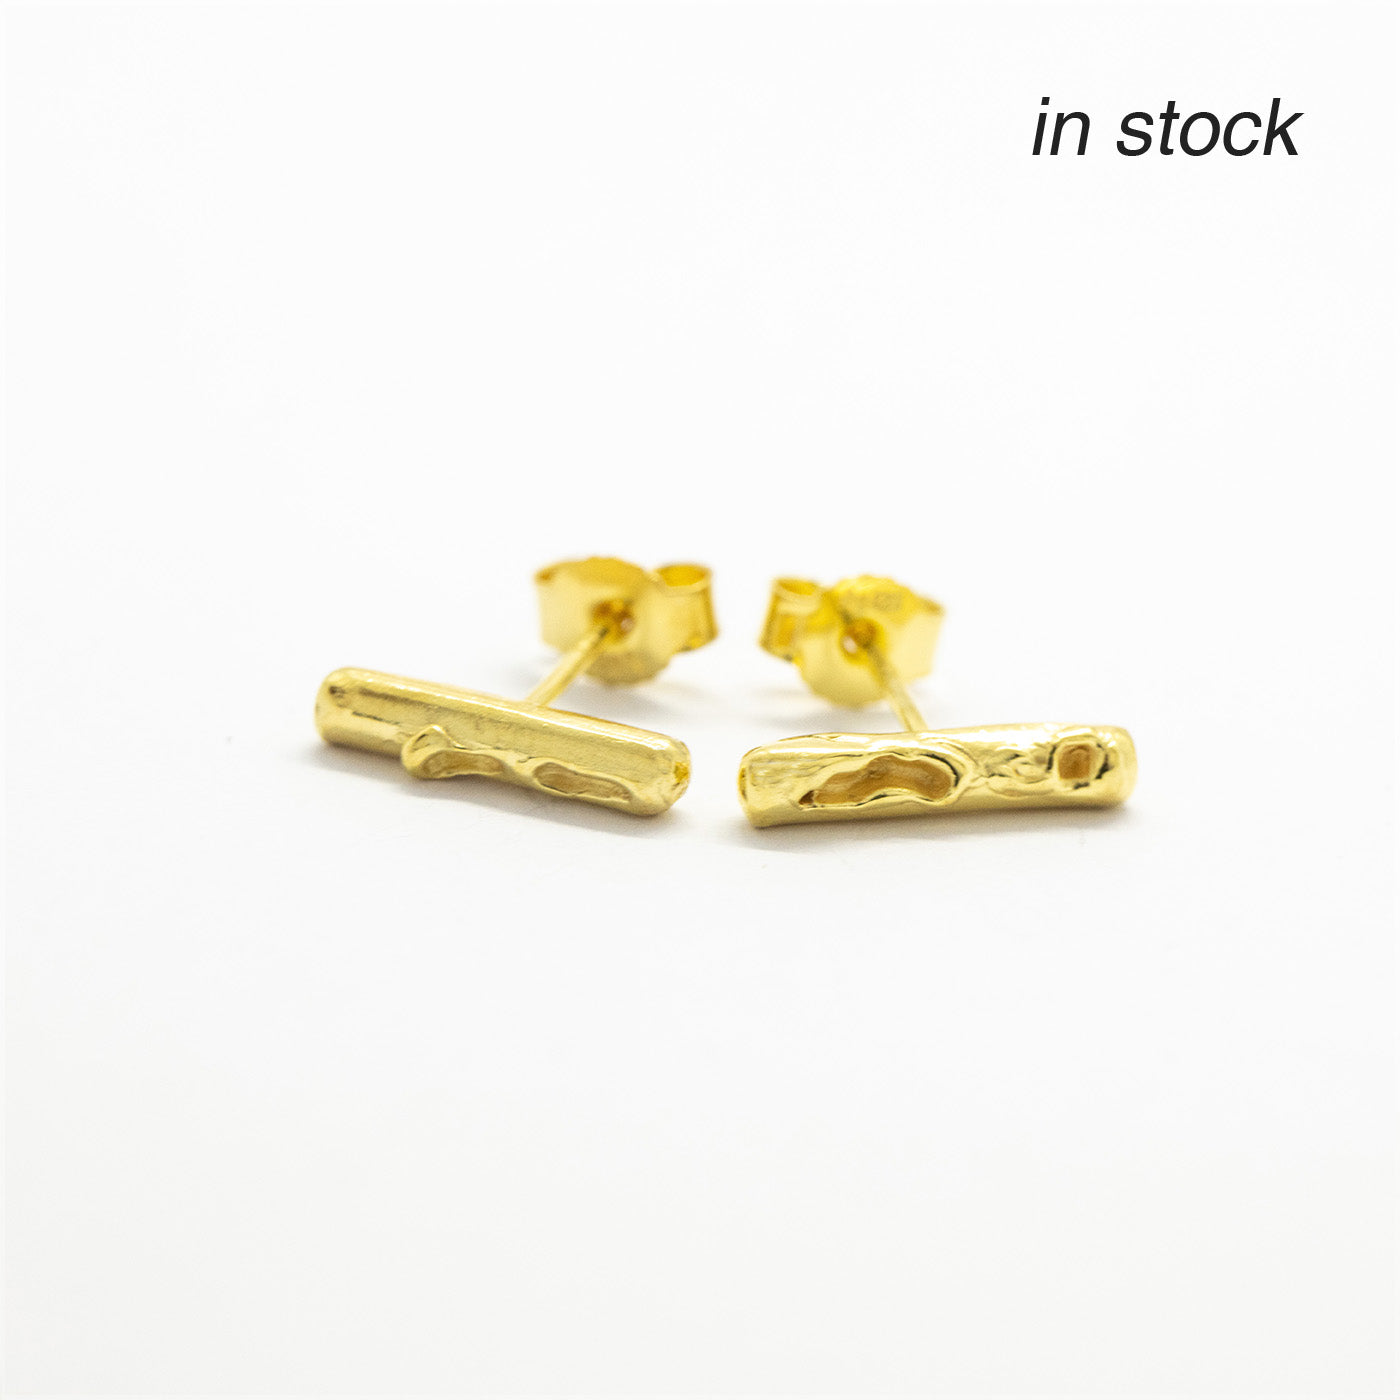 earrings cenote bar silver 18ct gold plated product view innan jewellery independent atelier berlin in stock